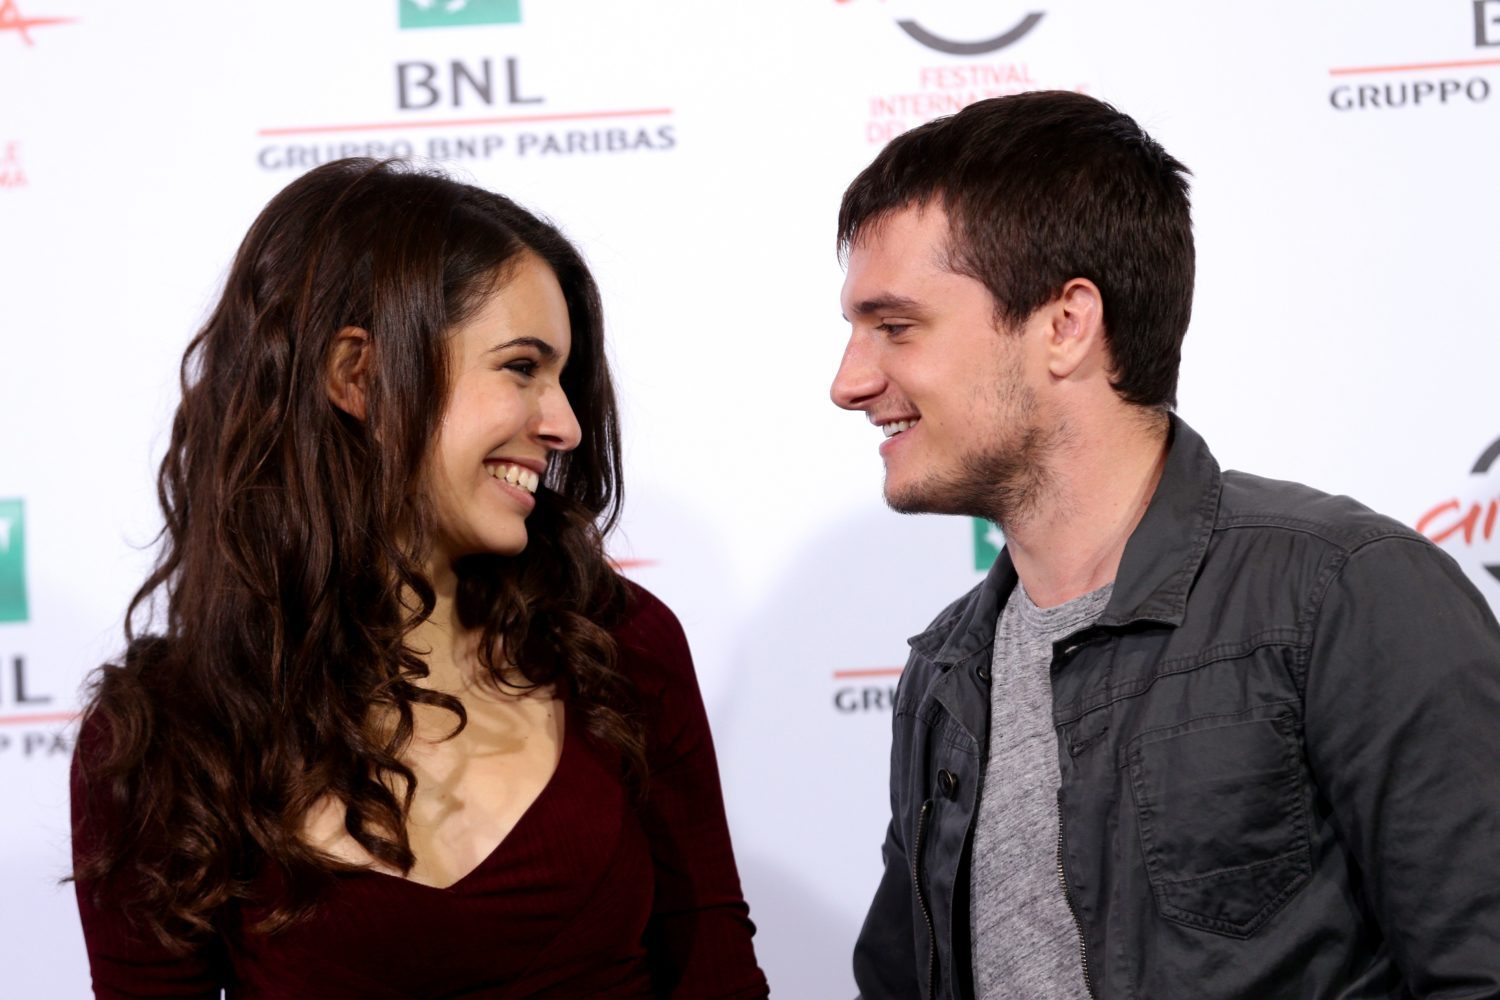 ROME, ITALY - OCTOBER 19: Claudia Traisac and Josh Hutcherson attend the 'Escobar: Paradise Lost' Photocall during the 9th Rome Film Festival on October 19, 2014 in Rome, Italy. (Photo by Vittorio Zunino Celotto/Getty Images)